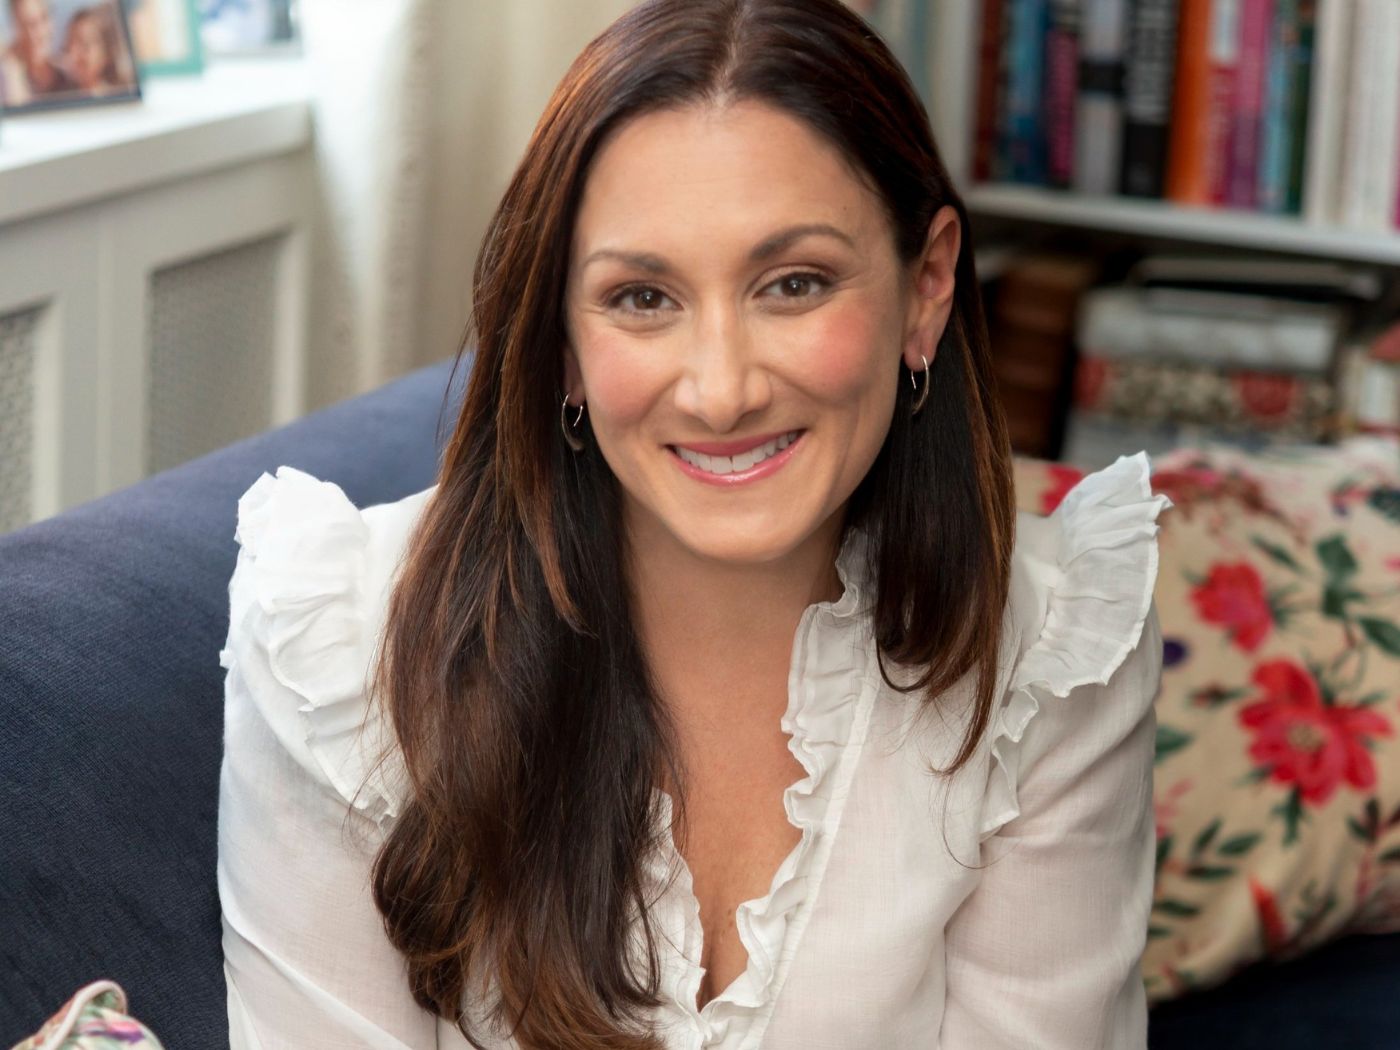 A woman in a white blouse sits smiling on a next to a floral cushion and a bookshelf.